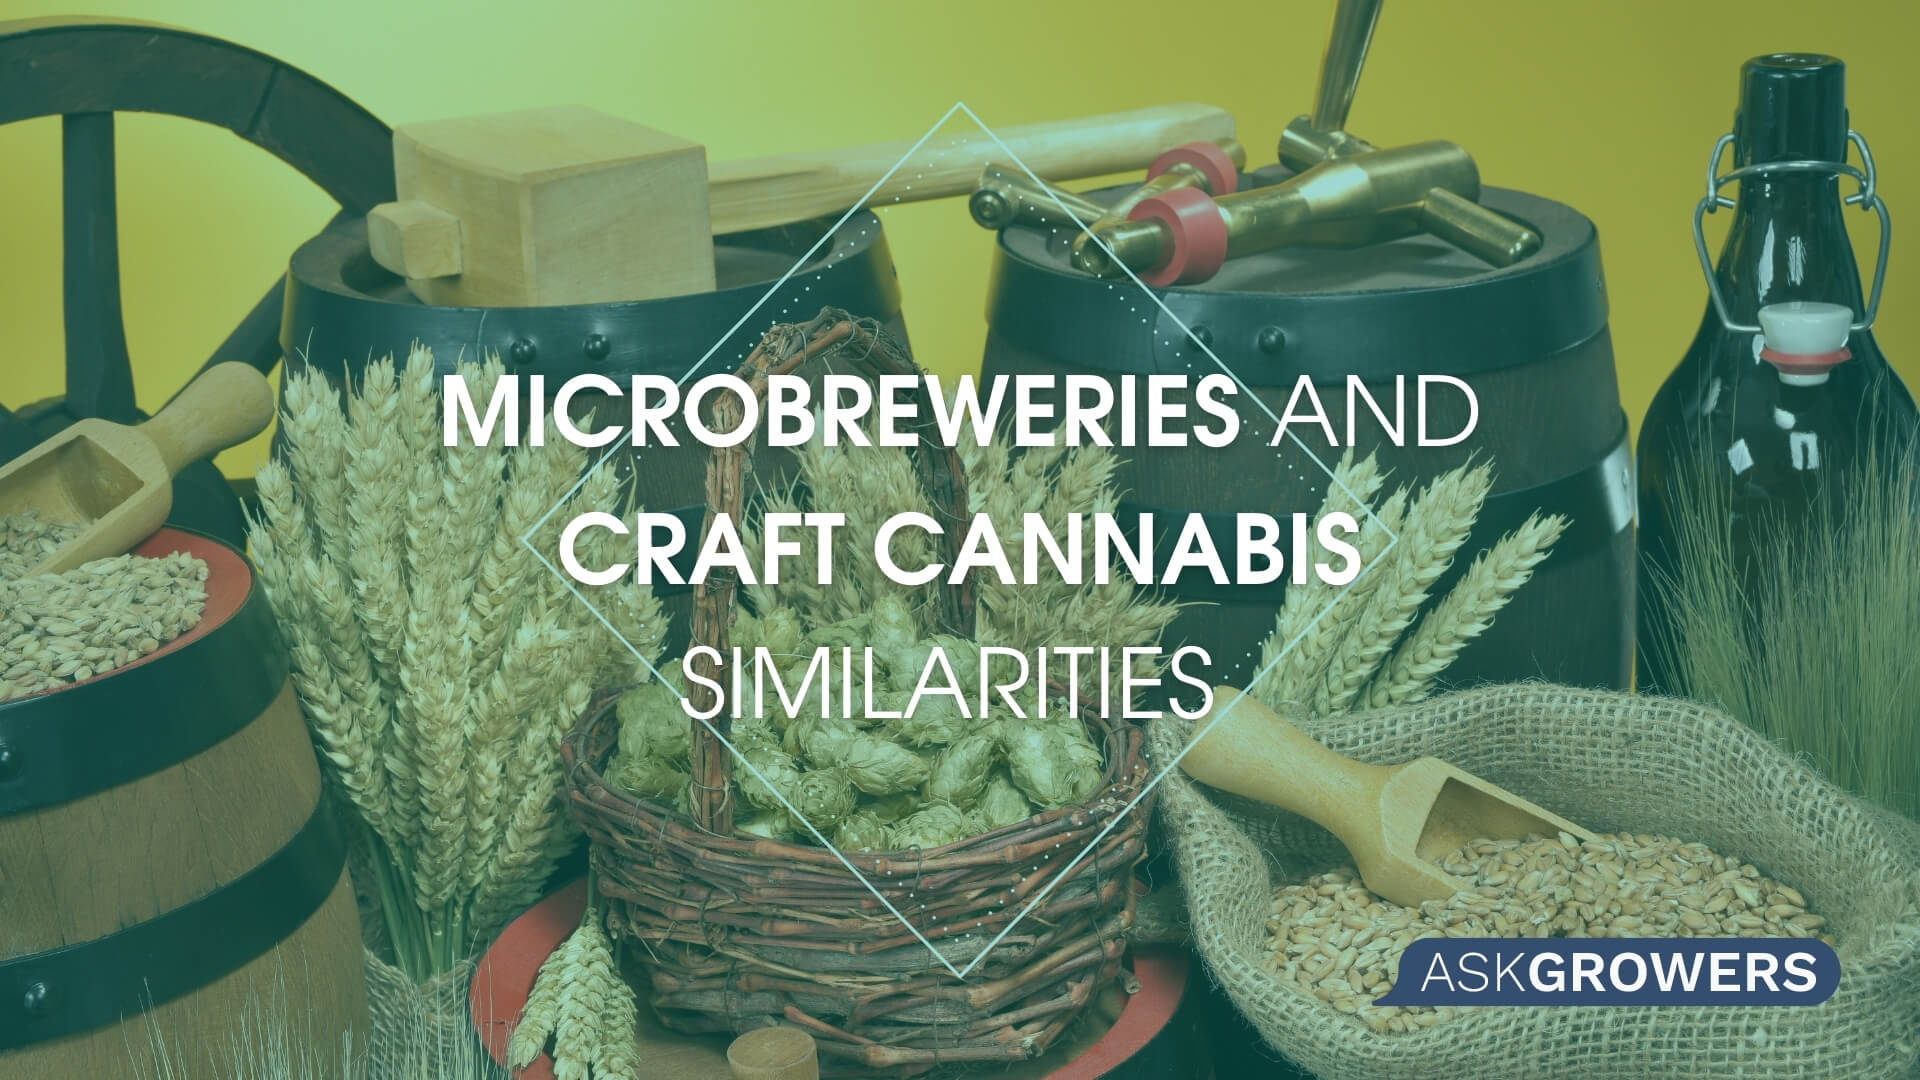 What Are the Similarities Between Microbreweries and Craft Cannabis?